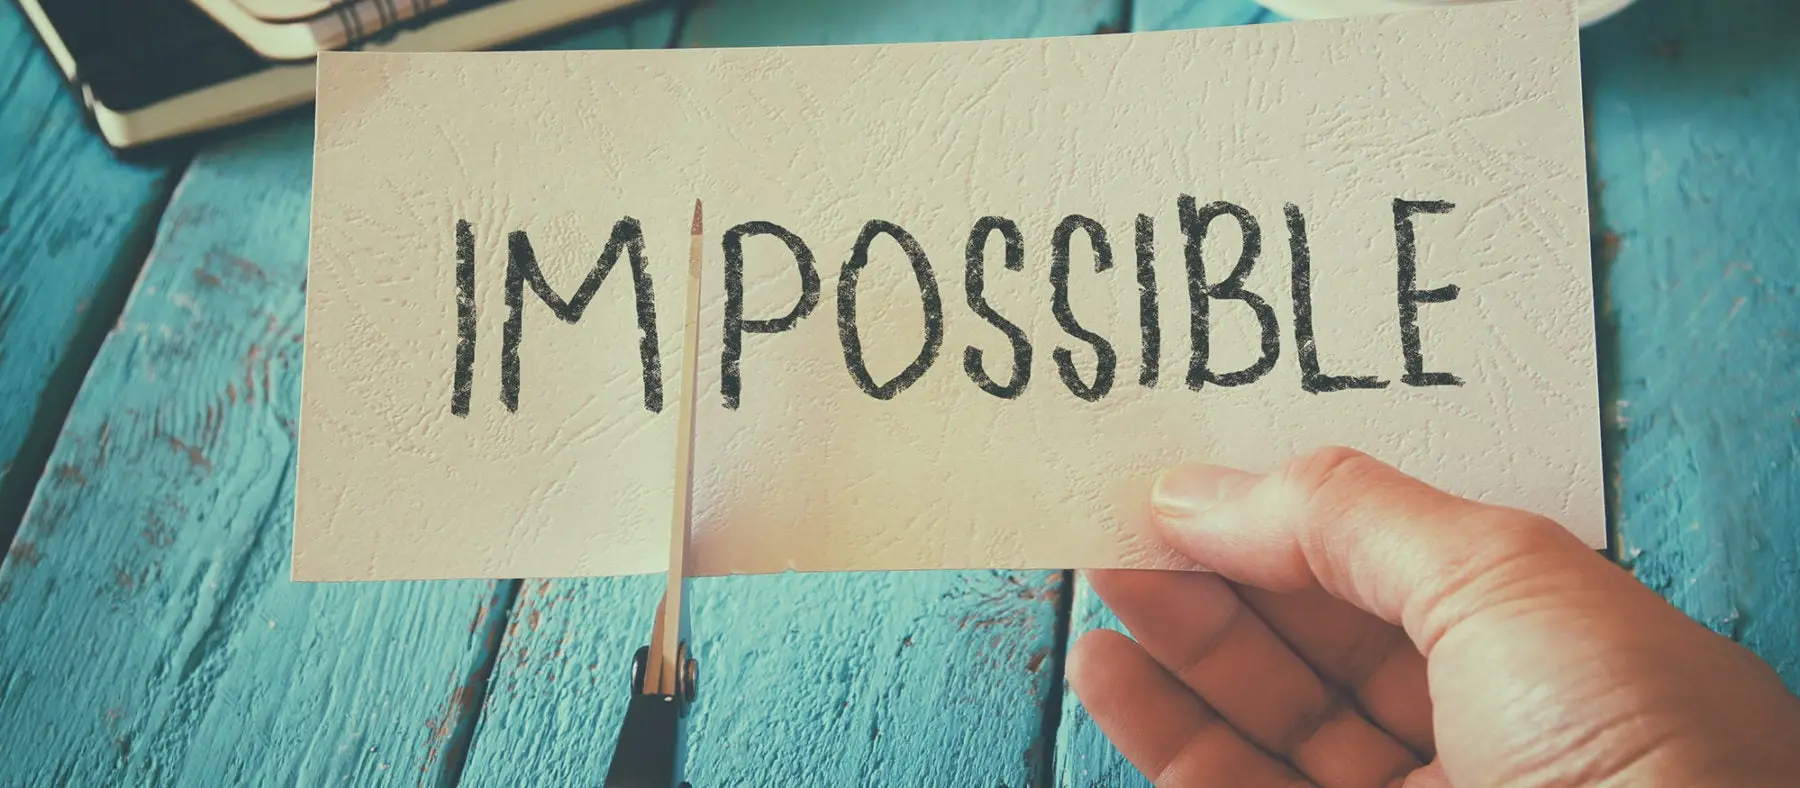 The word Impossible being cut into I'm Possible.